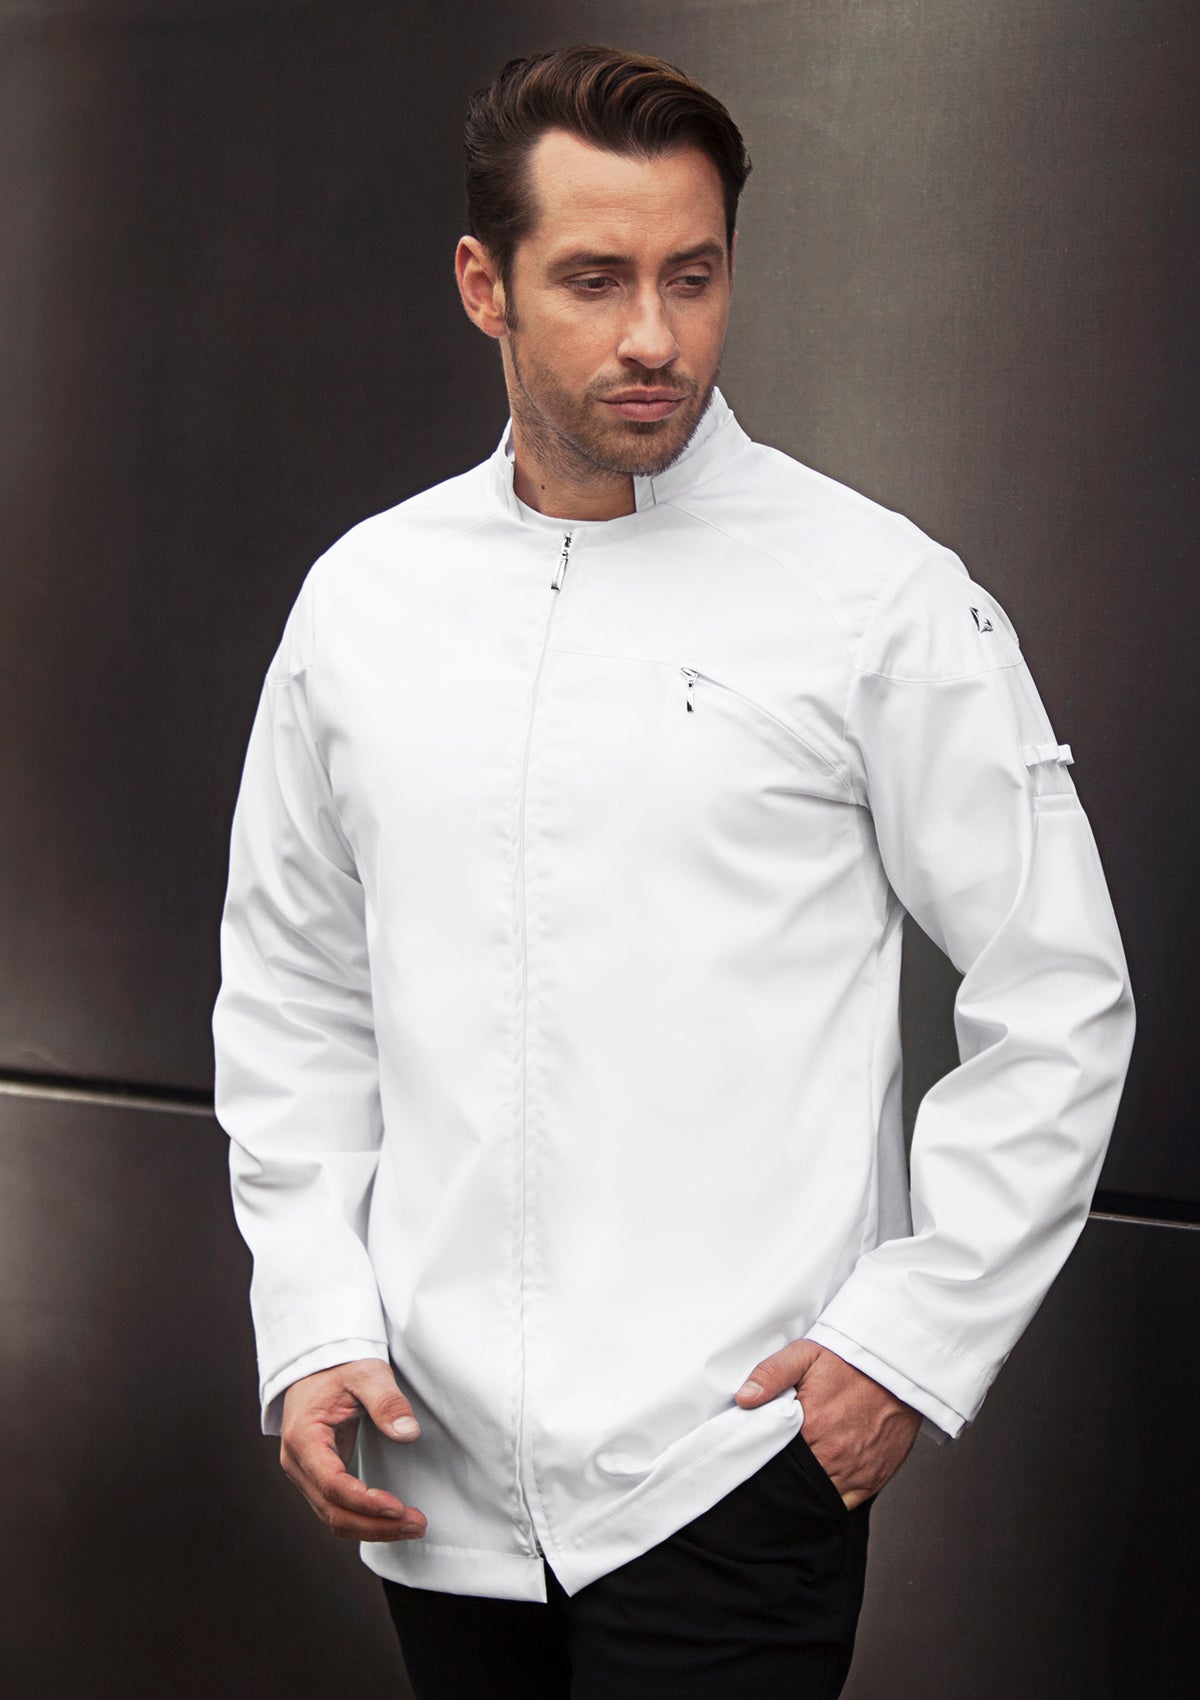 Cookniche  Highest-quality chef clothing and service uniforms